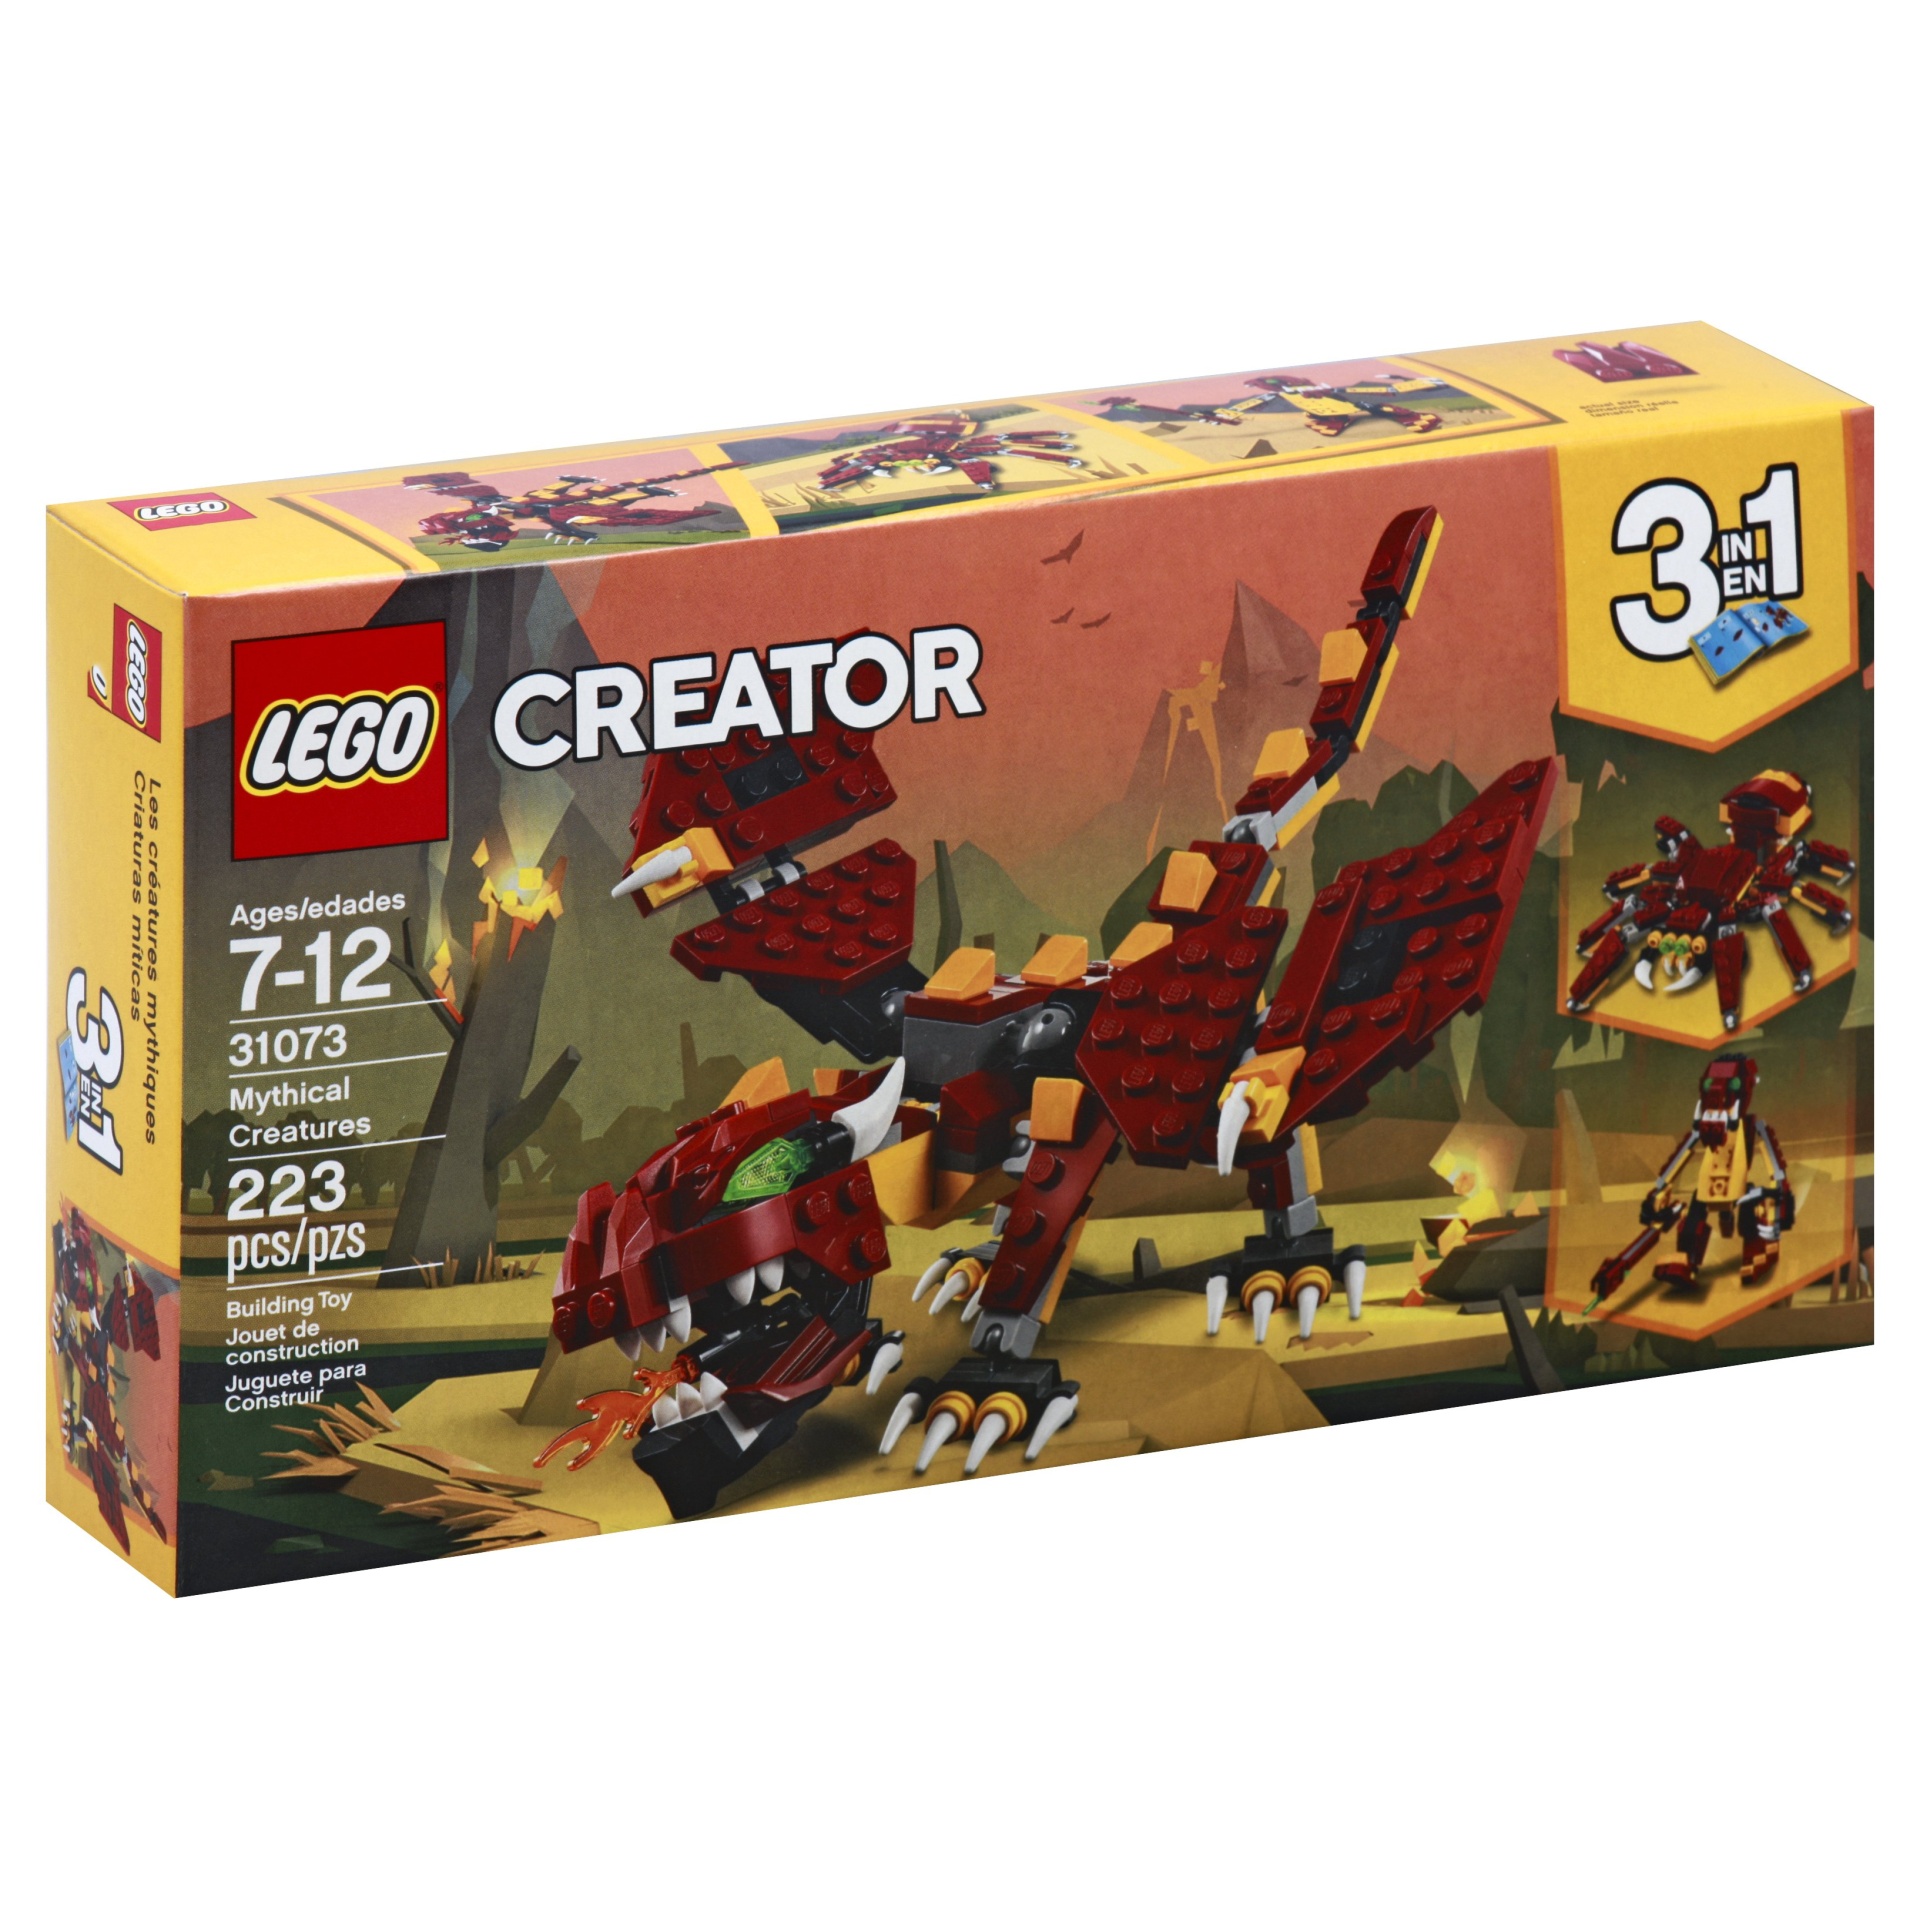 slide 1 of 1, LEGO Creator Mythical Creatures 31073, 1 ct